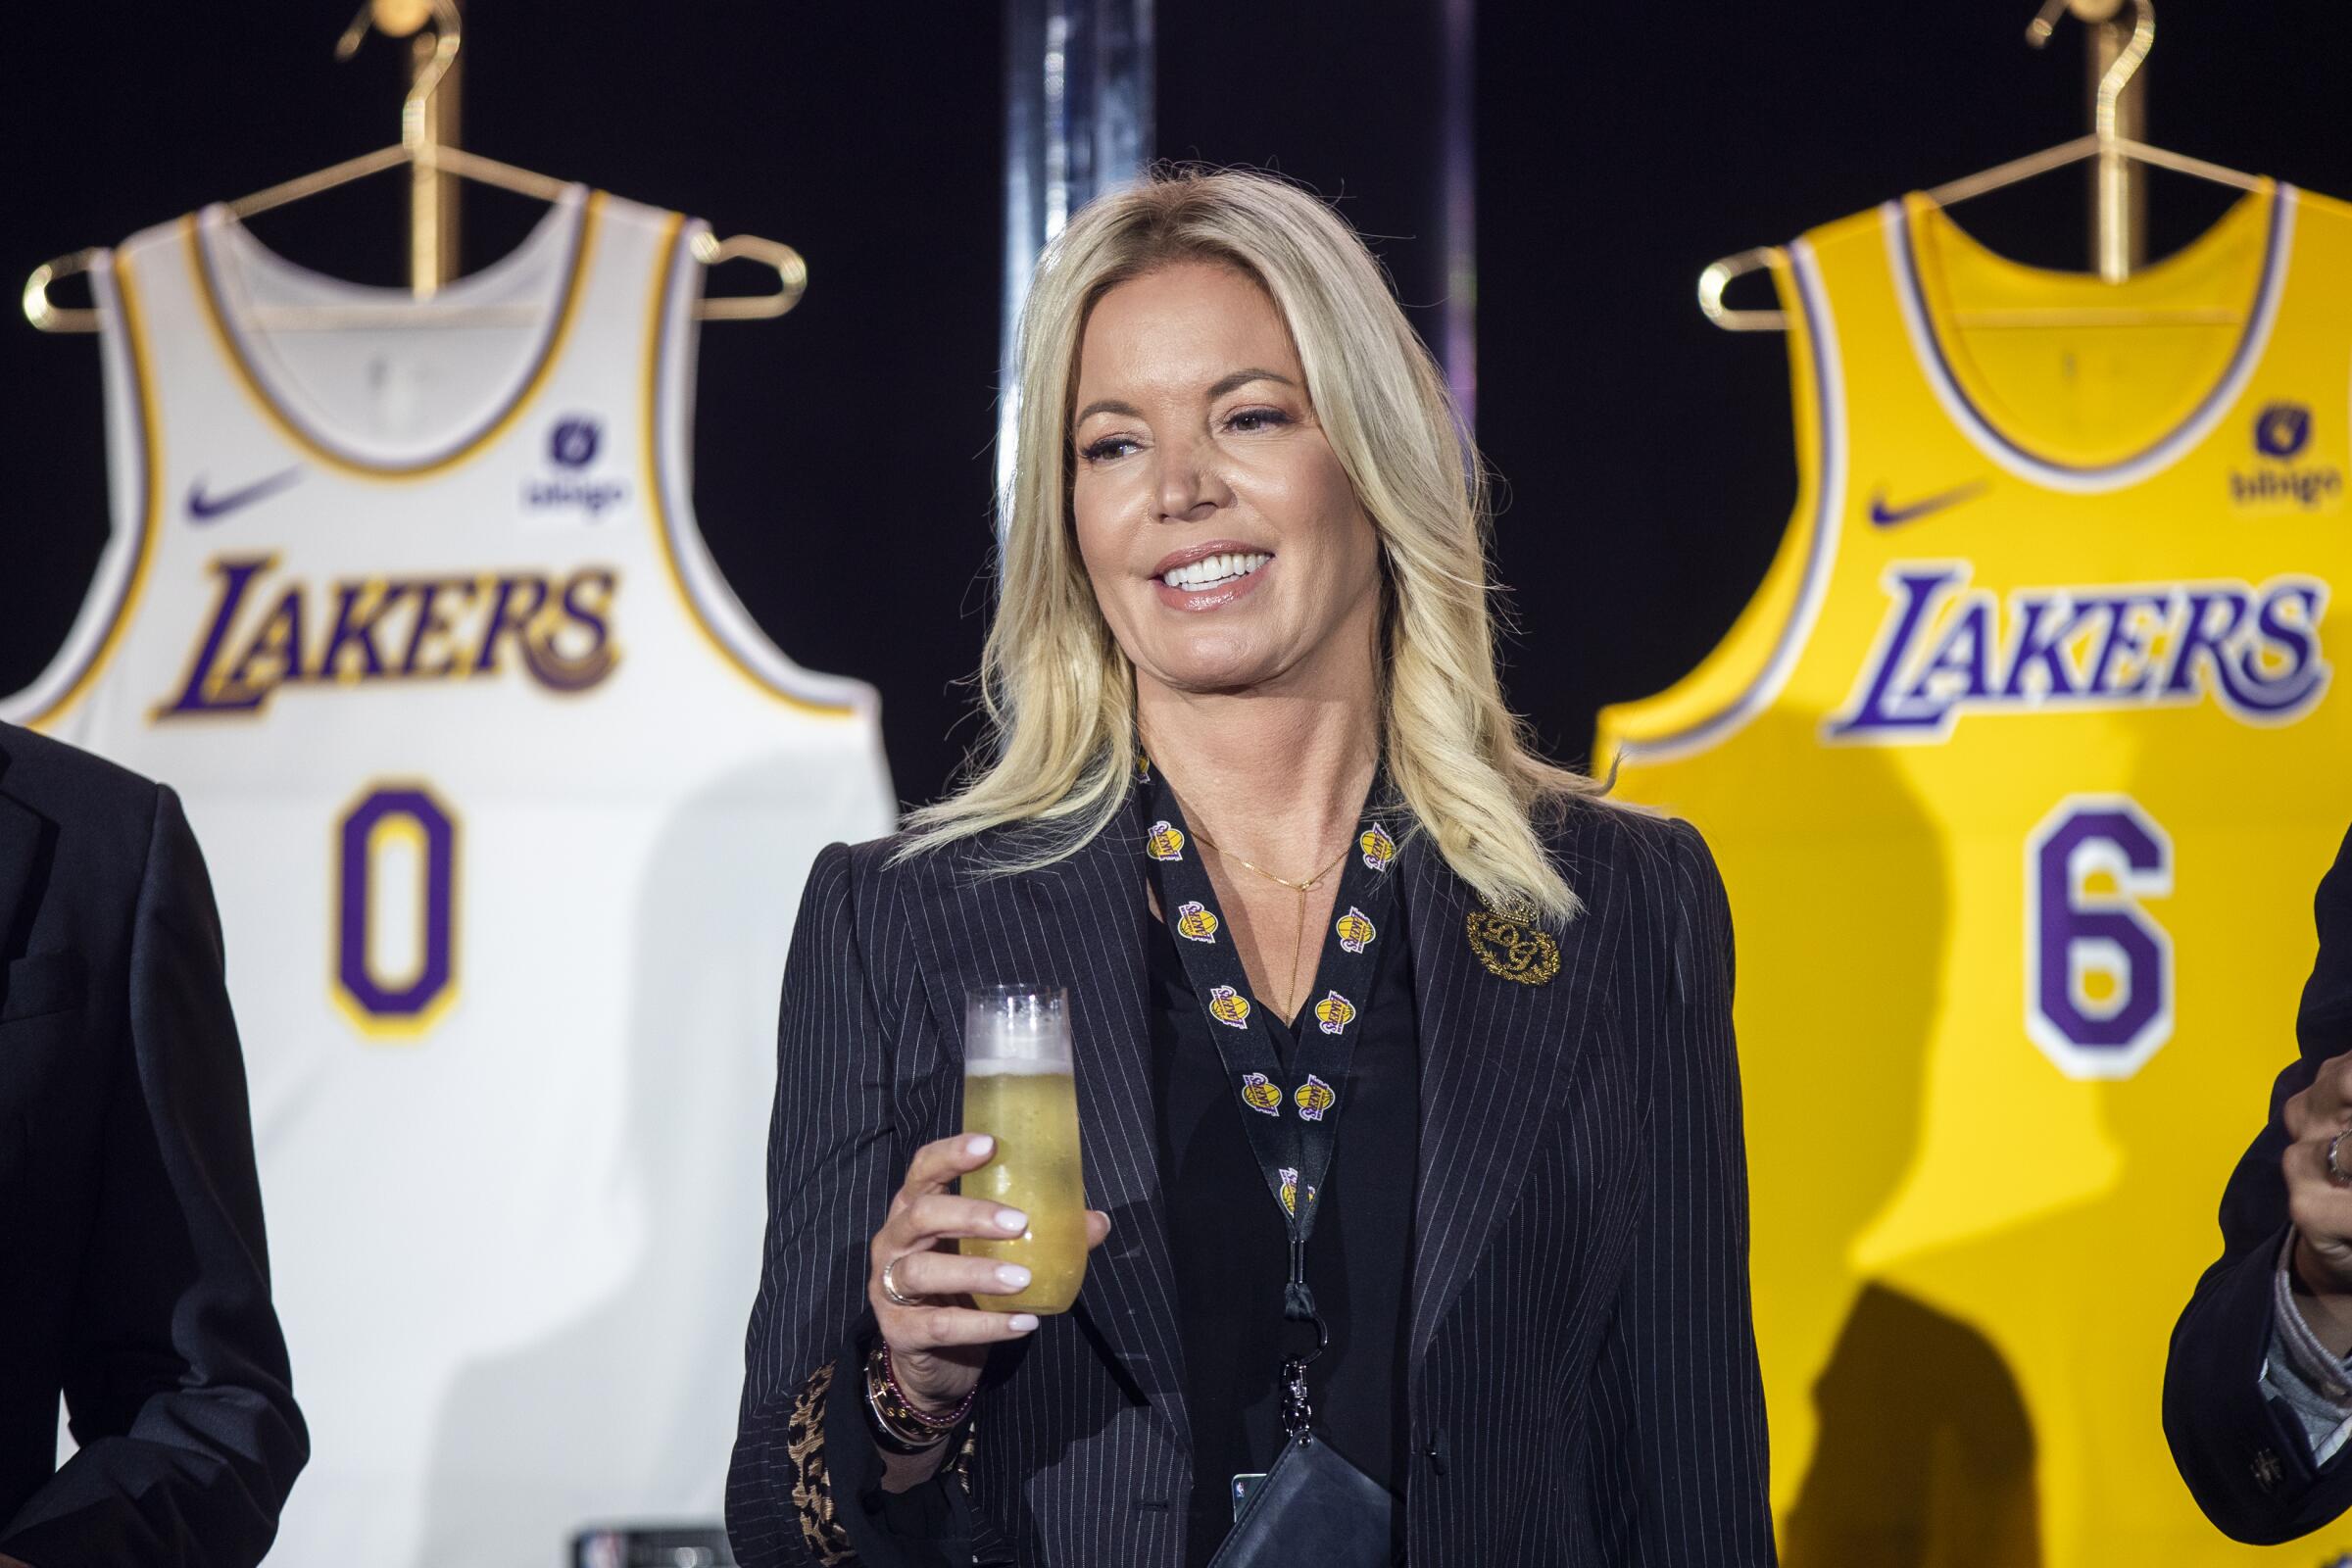 Lakers News: Magic Johnson Dines with Jeanie Buss After Resigning